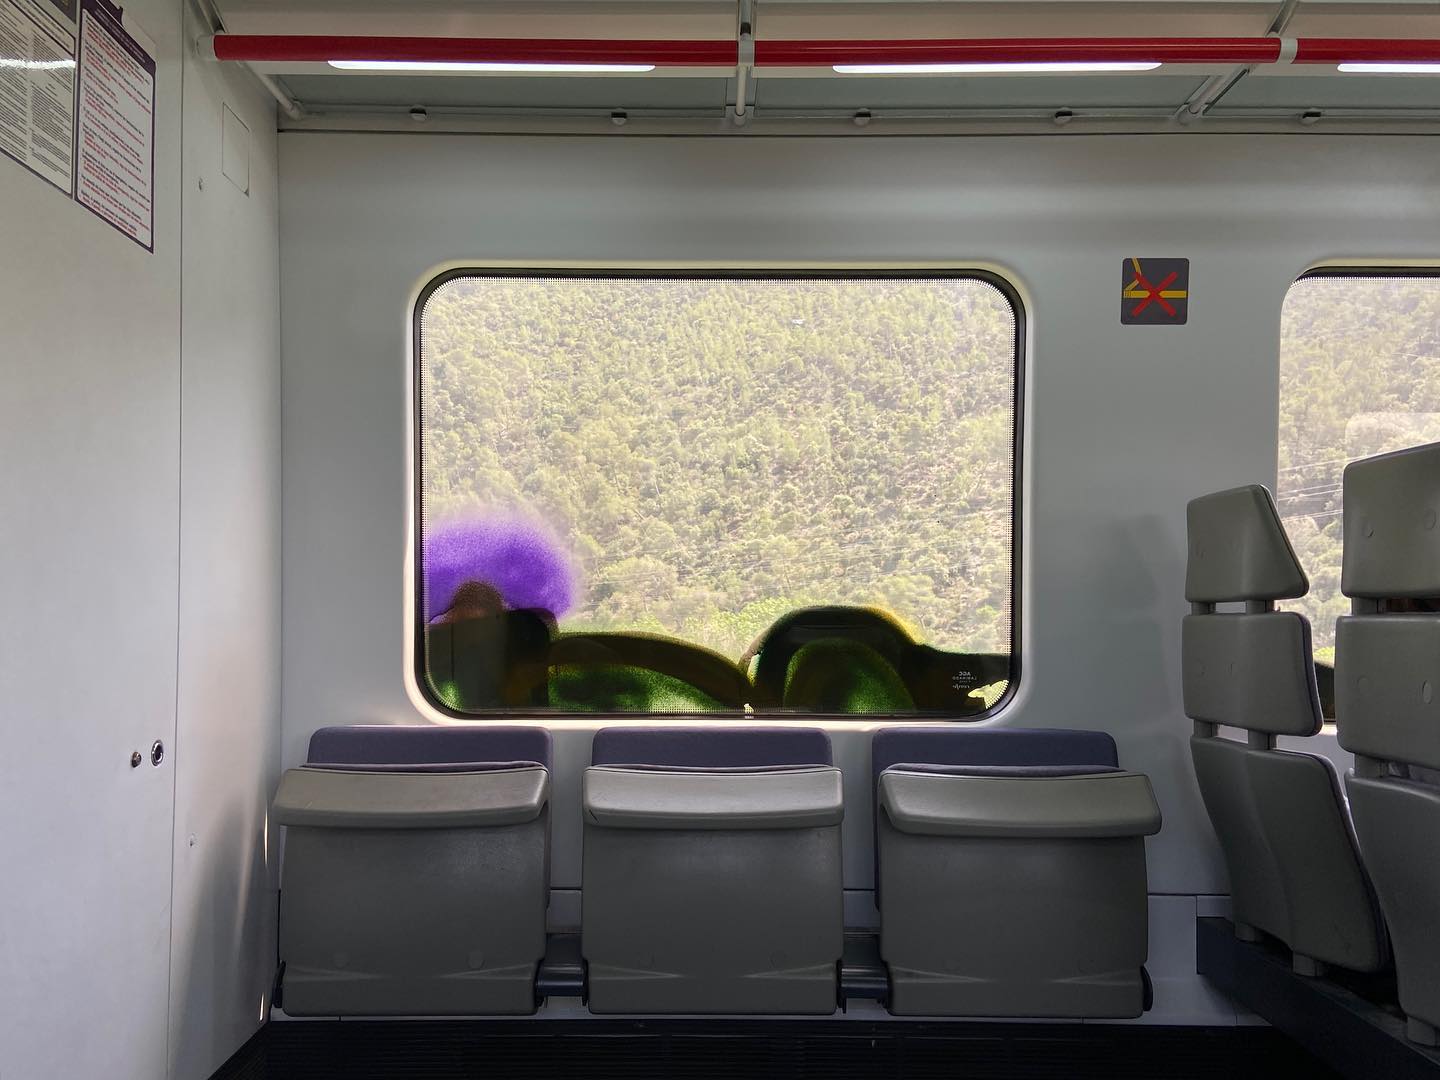 across a train carriage, looking at foldable sideways seats. red handrail above. out of the window – mountains and dense trees (which look really small because the train is high up). window is sprayed purple and green, obscuring the bottom edge